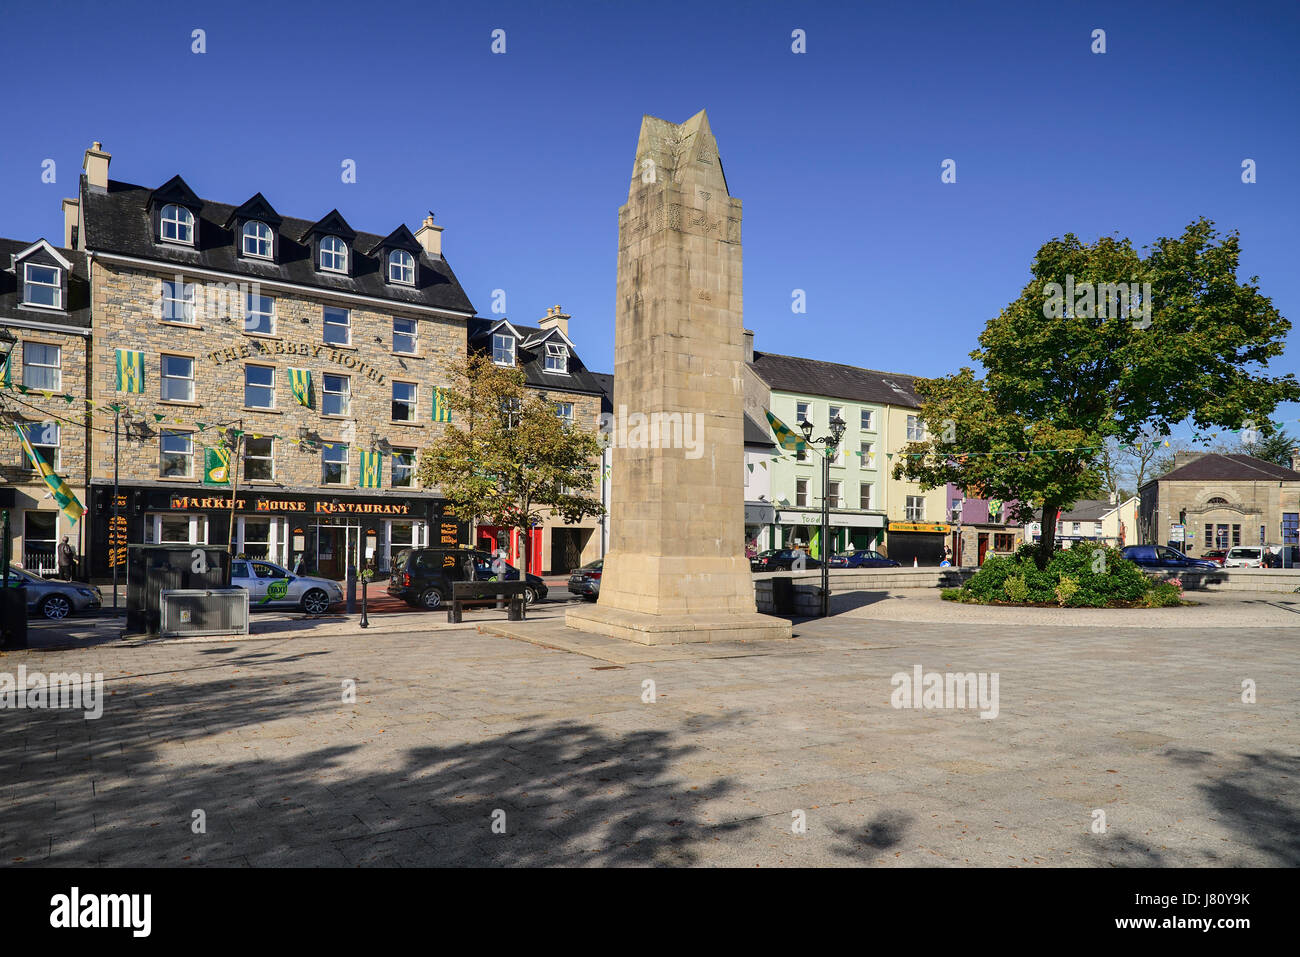 Ireland,County Donegal, Donegal Town, The Diamond with Obelisk which commemorates four monks called the Four Masters who compiled and wrote the Annals Stock Photo